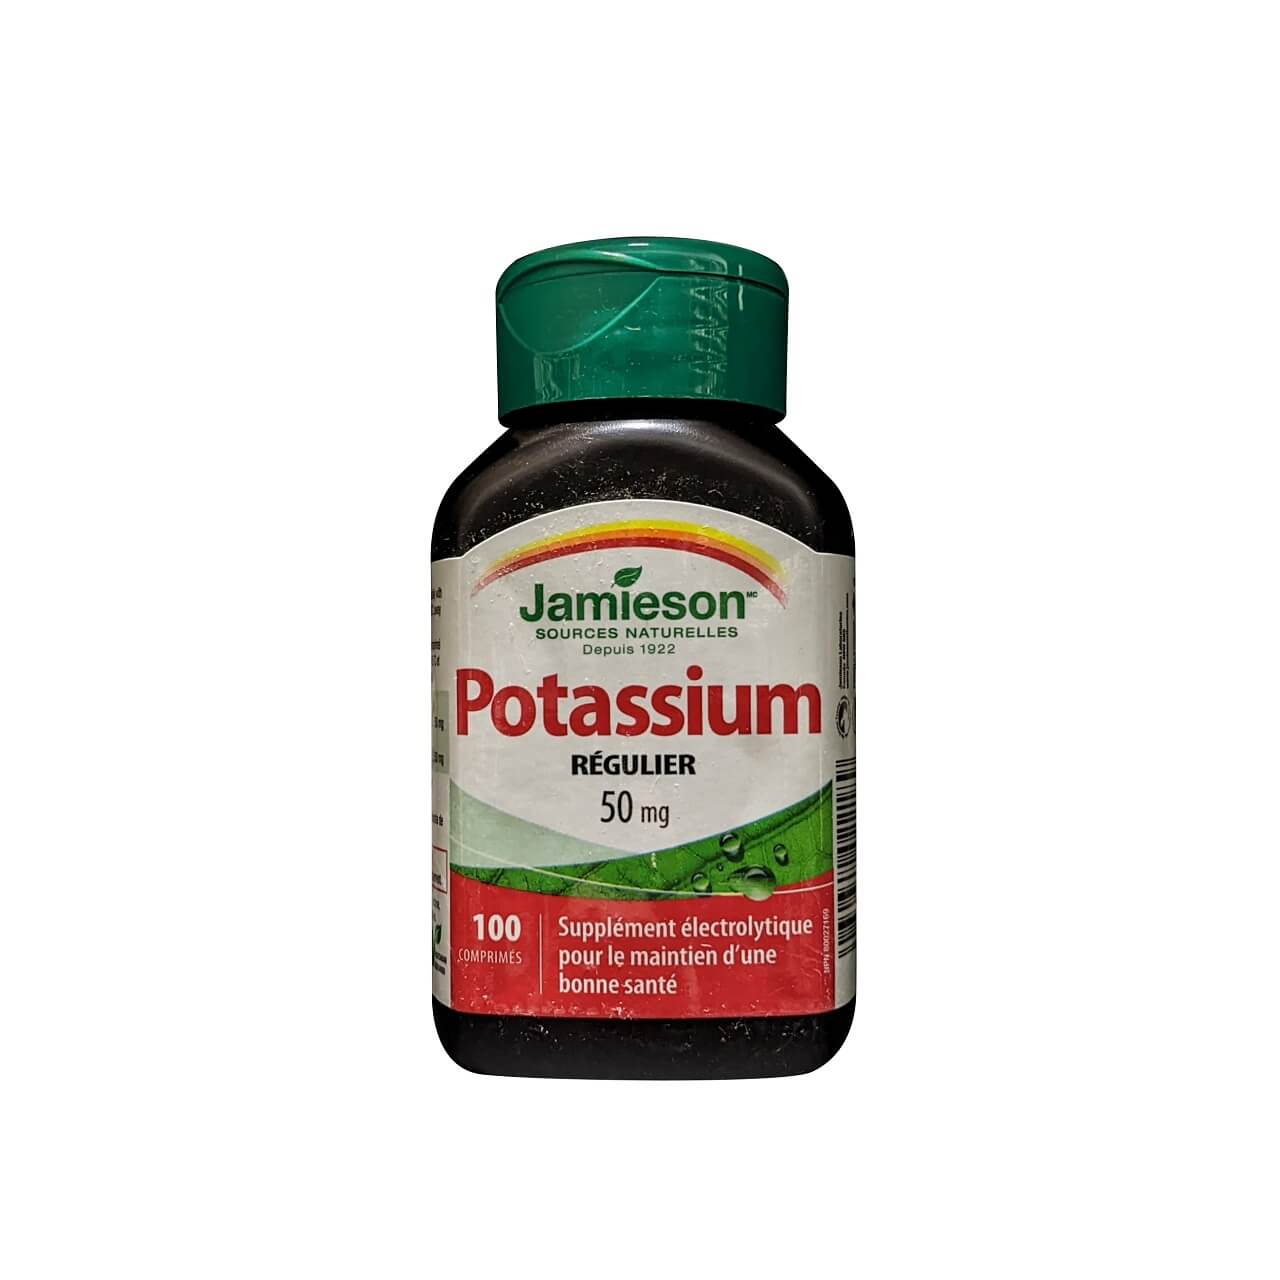 Product label for Jamieson Potassium Regular Strength 50 mg (100 tablets) in French